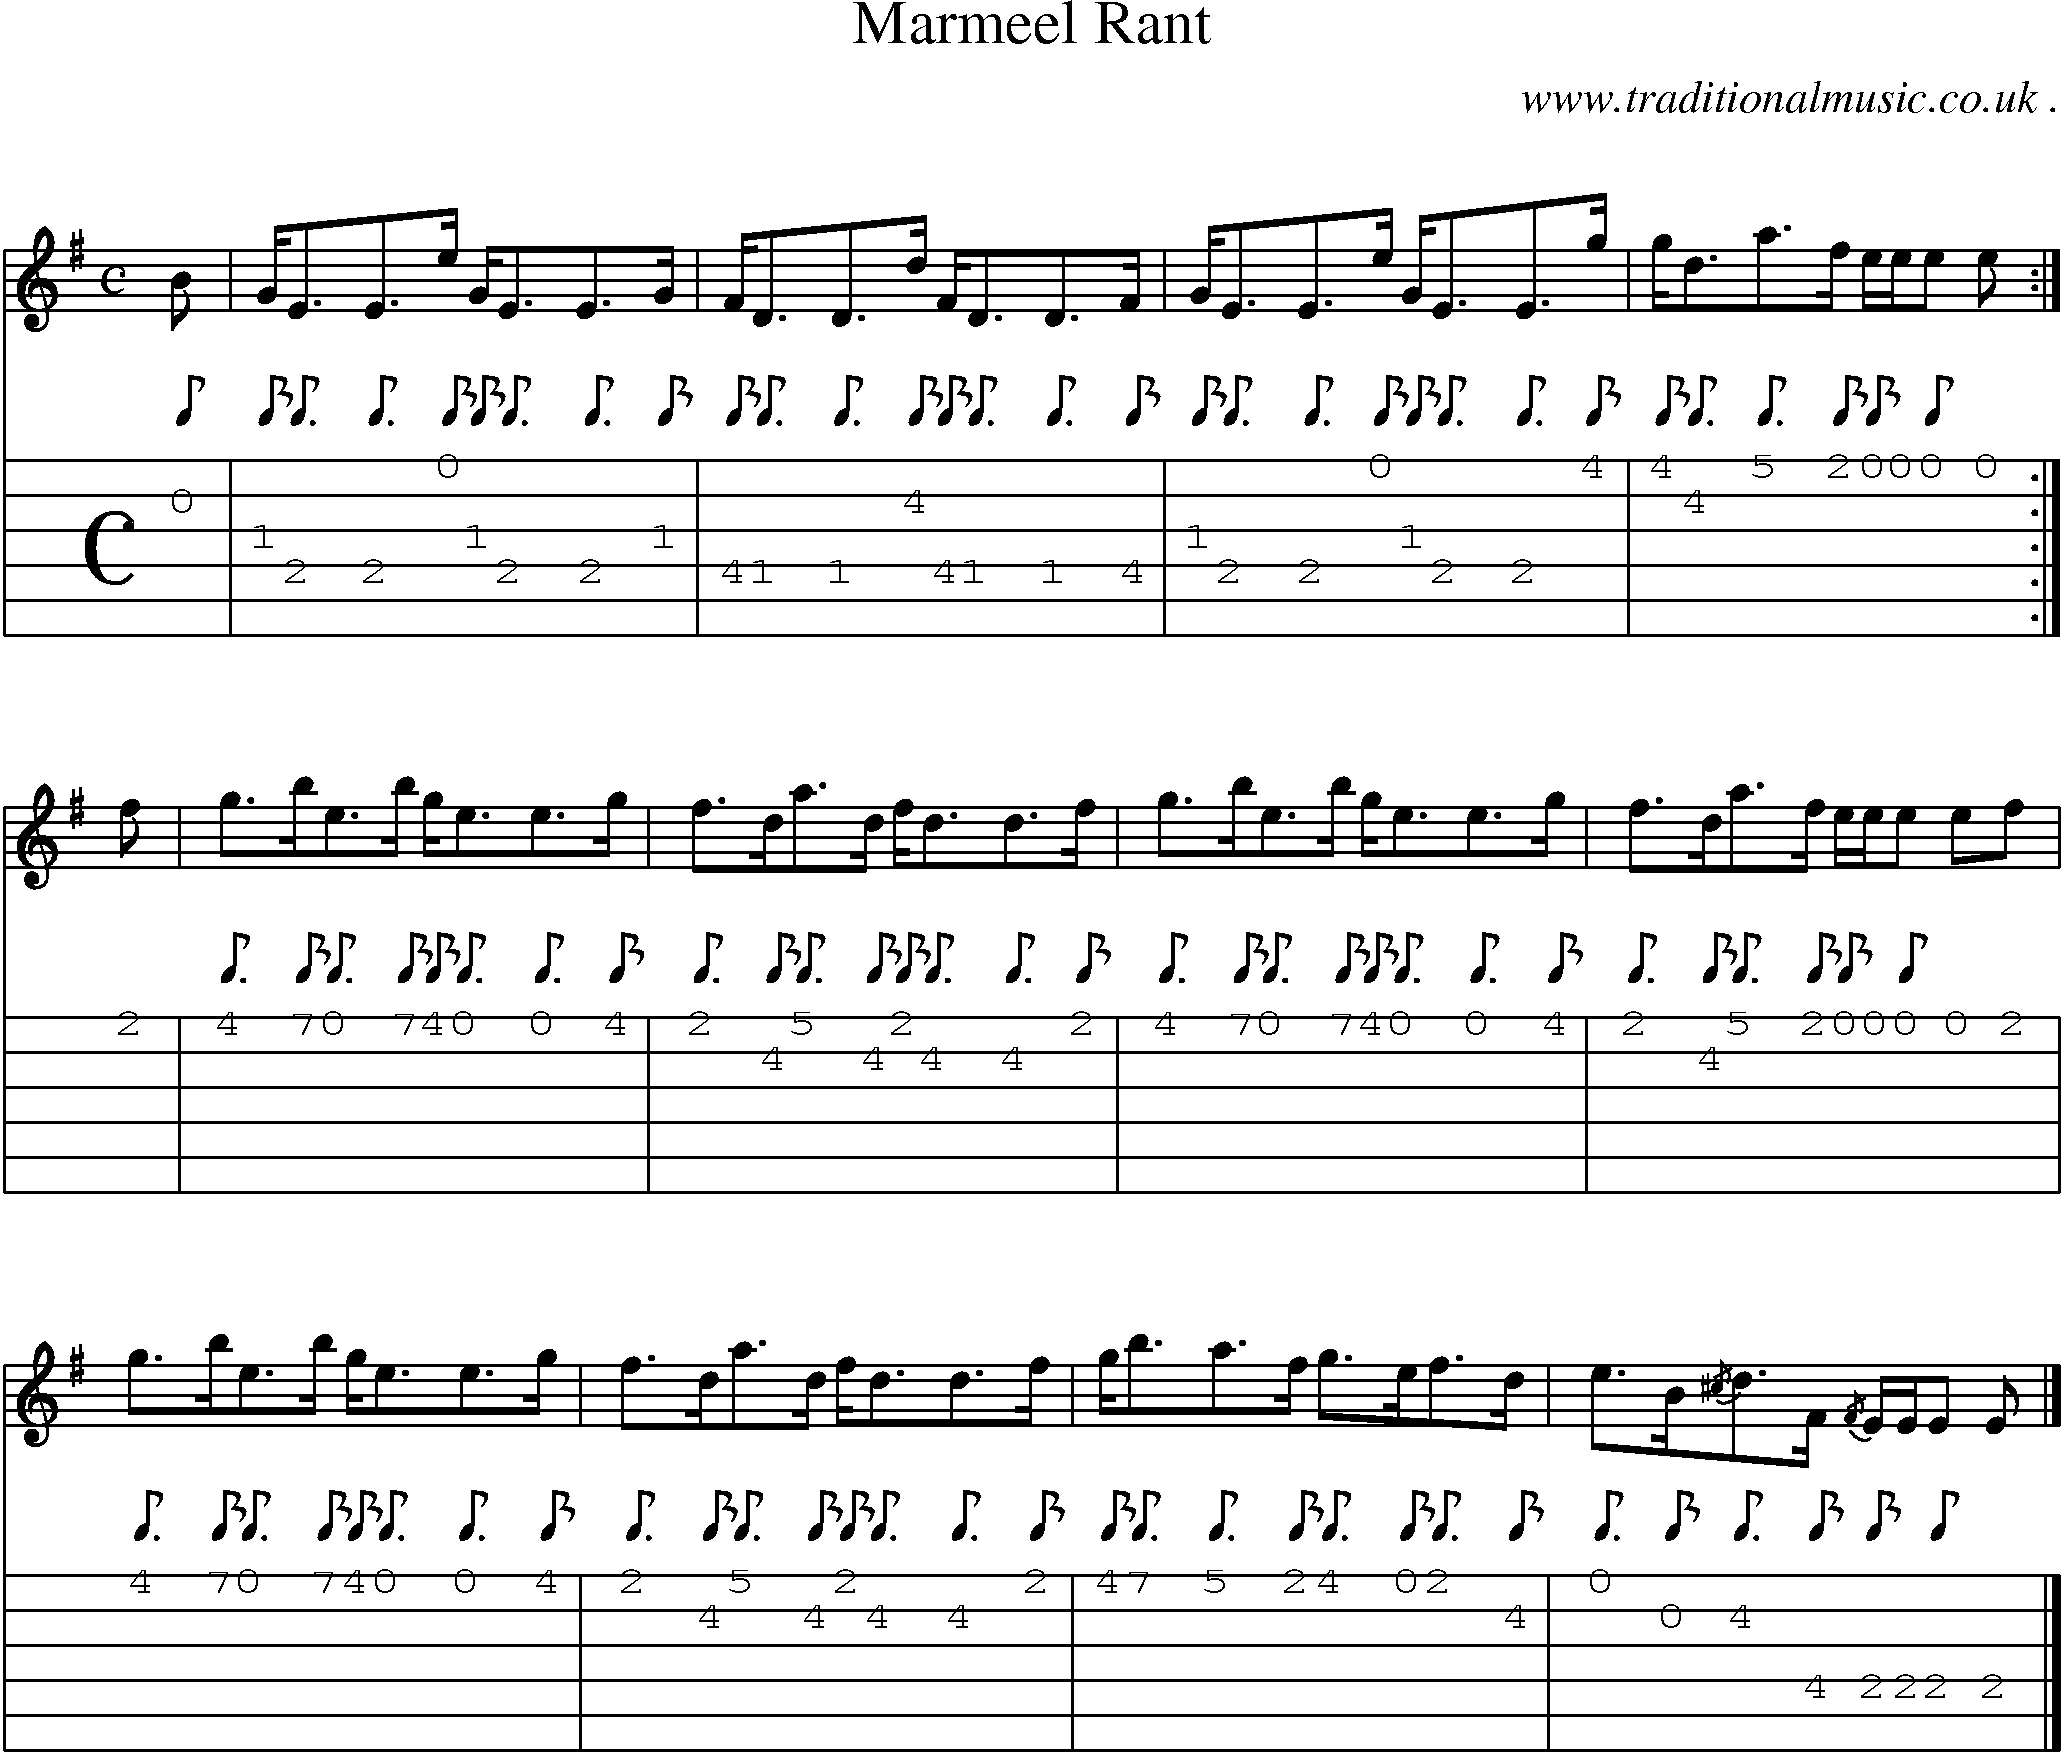 Sheet-music  score, Chords and Guitar Tabs for Marmeel Rant